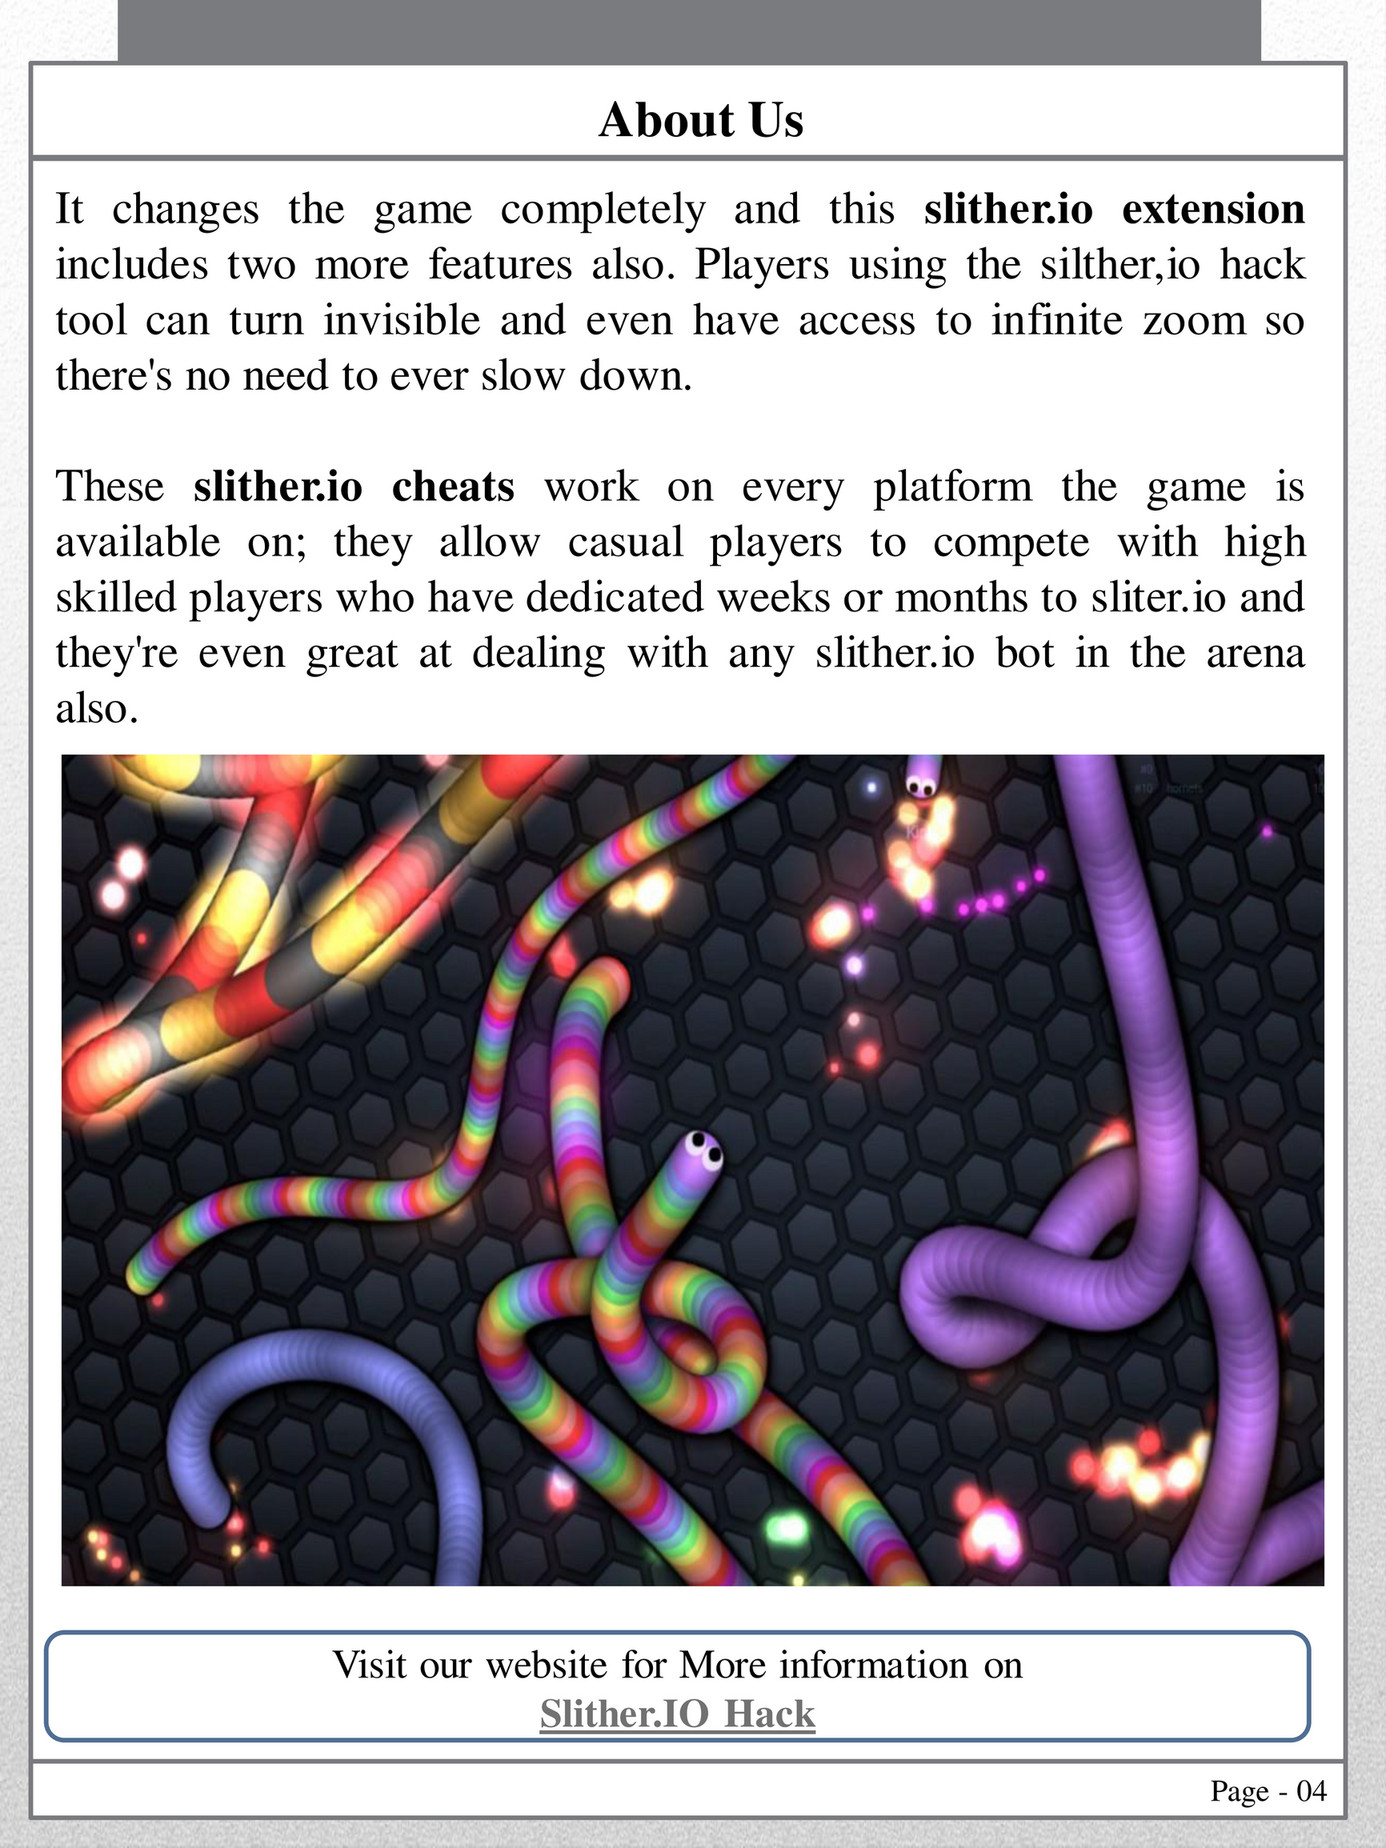 slither io hack tool - Slither Hacks - Page 1 - Created with Publitas.com